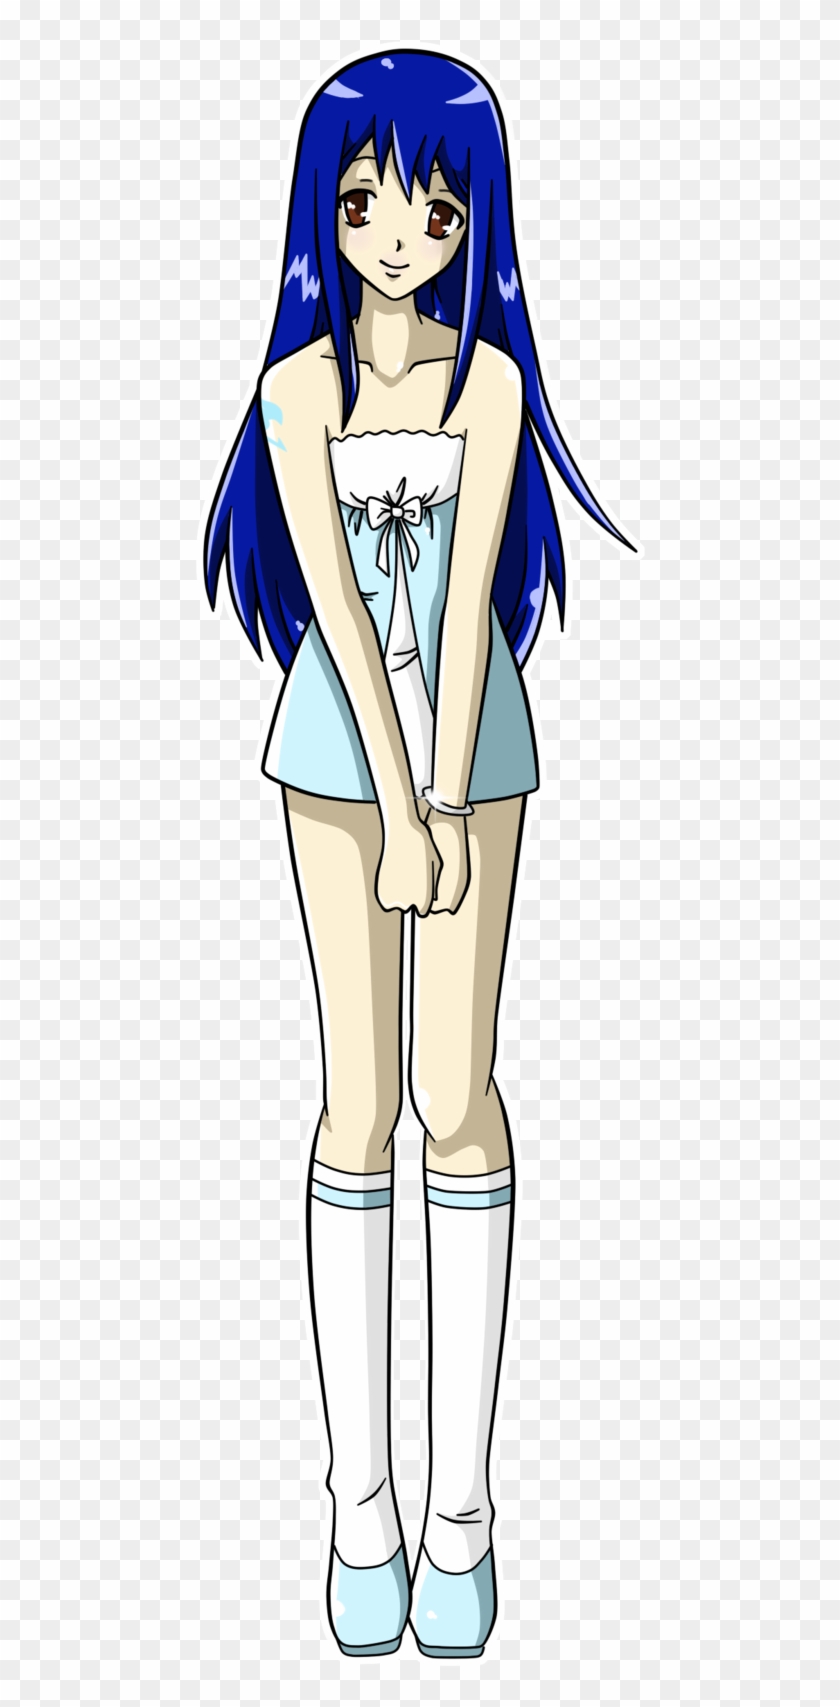 Anime Girl Full Body Anime Girl Full Body Free Transparent Png Clipart Images Download